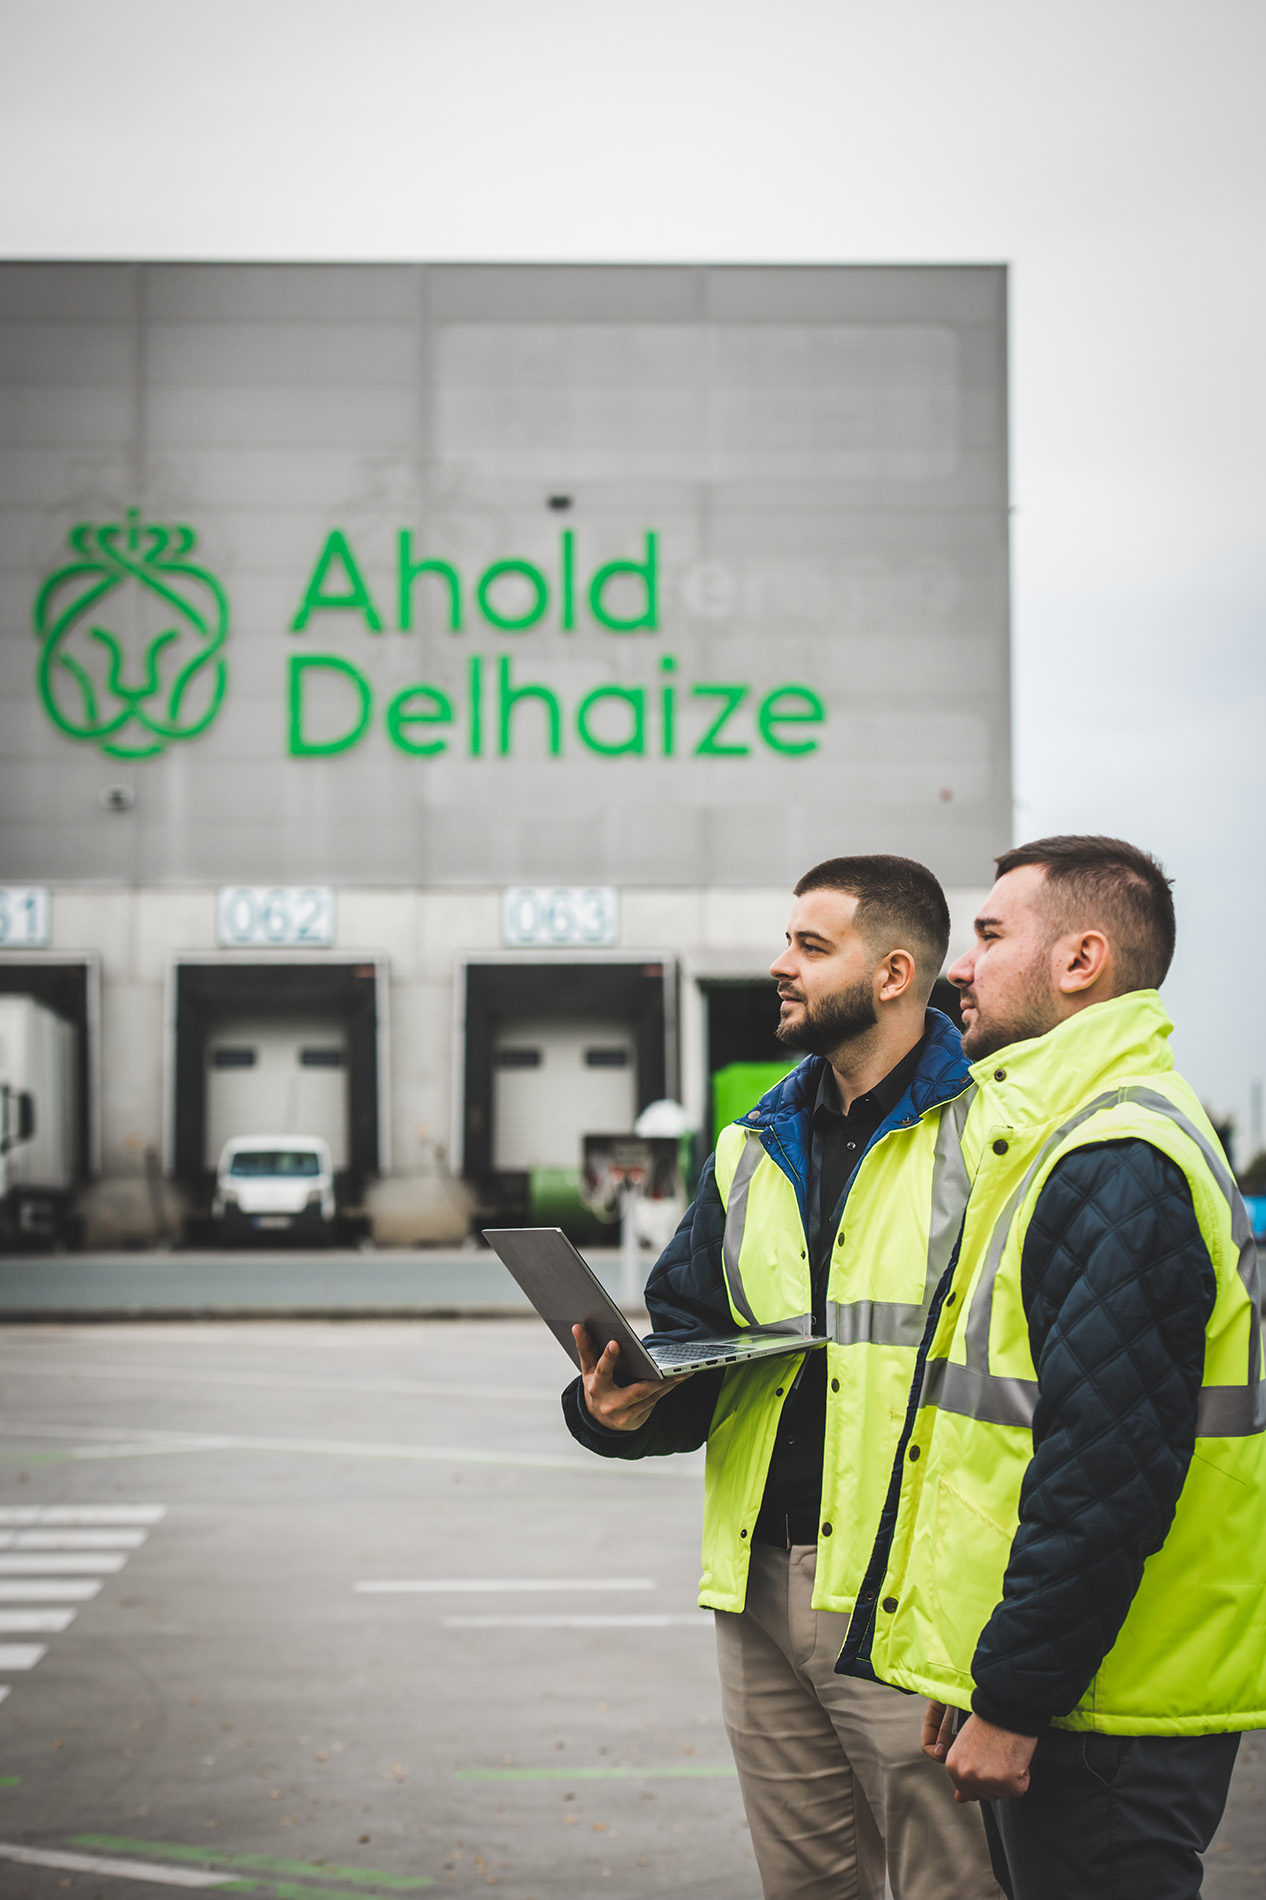 DelhaizeSerbia_Aholddelhaize_careers_Nenad_standing_with_colleague.jpg